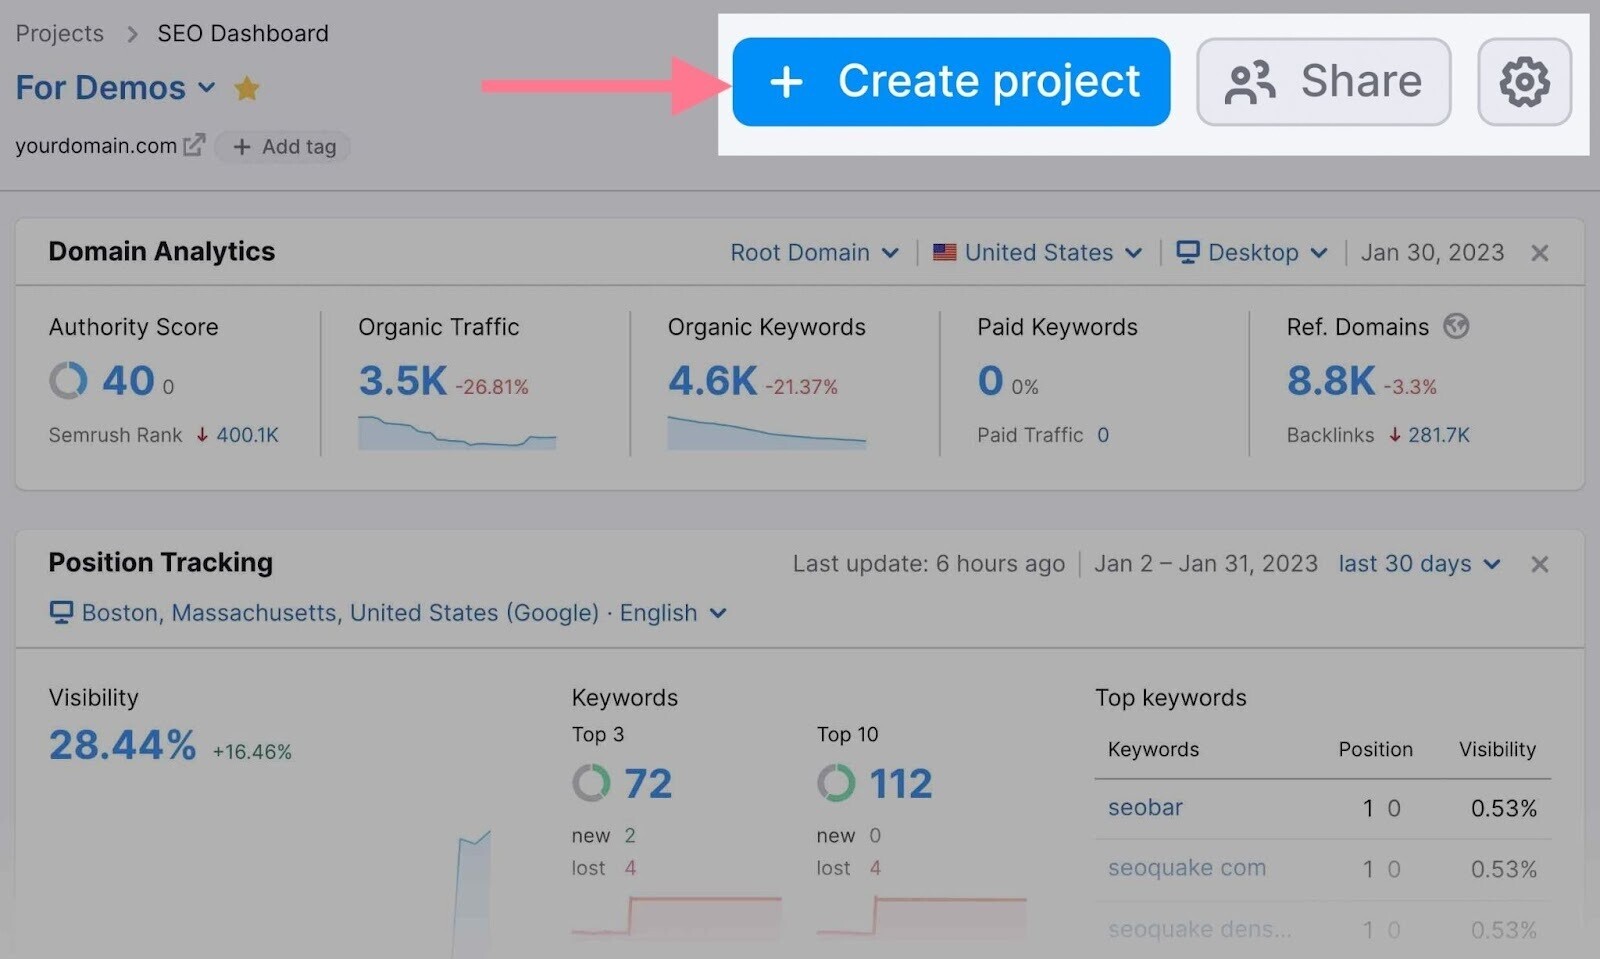 create a project to access SEO dashboard